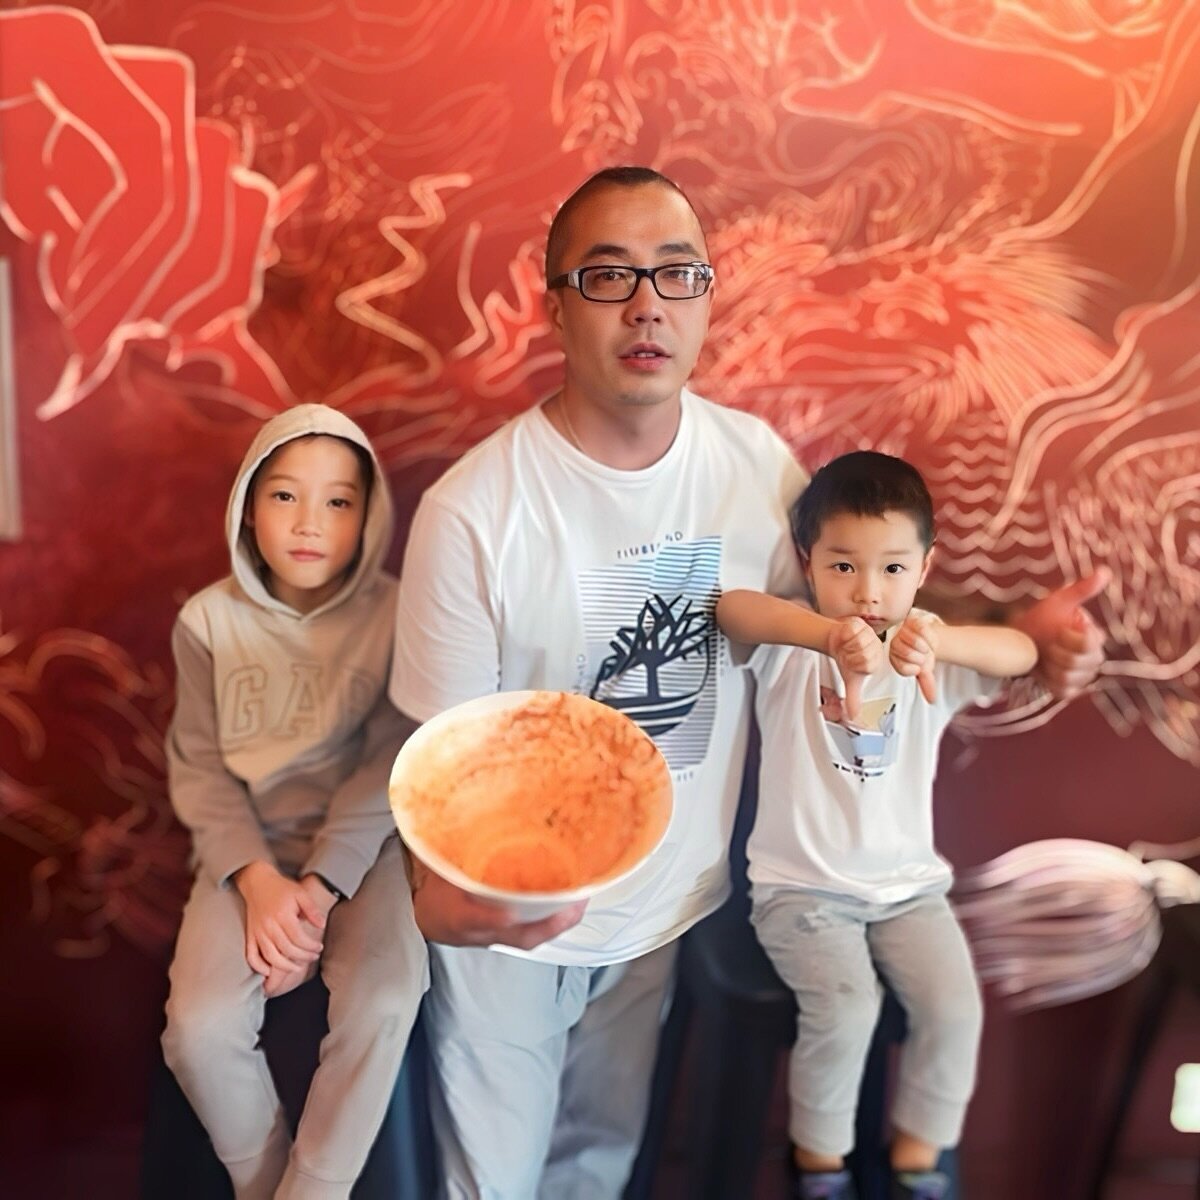 The struggle is real, the audience is tough! 
Amor completed our Monster Hell Ramen Challenge under twelve minutes!
Can you handle the 🔥🔥🔥?
#HellRamenChallenge
.
.
.
.
.
#stringsramen #foodforfoodies #foodchallange #foodbeast #thefeedfeed#getinmyb